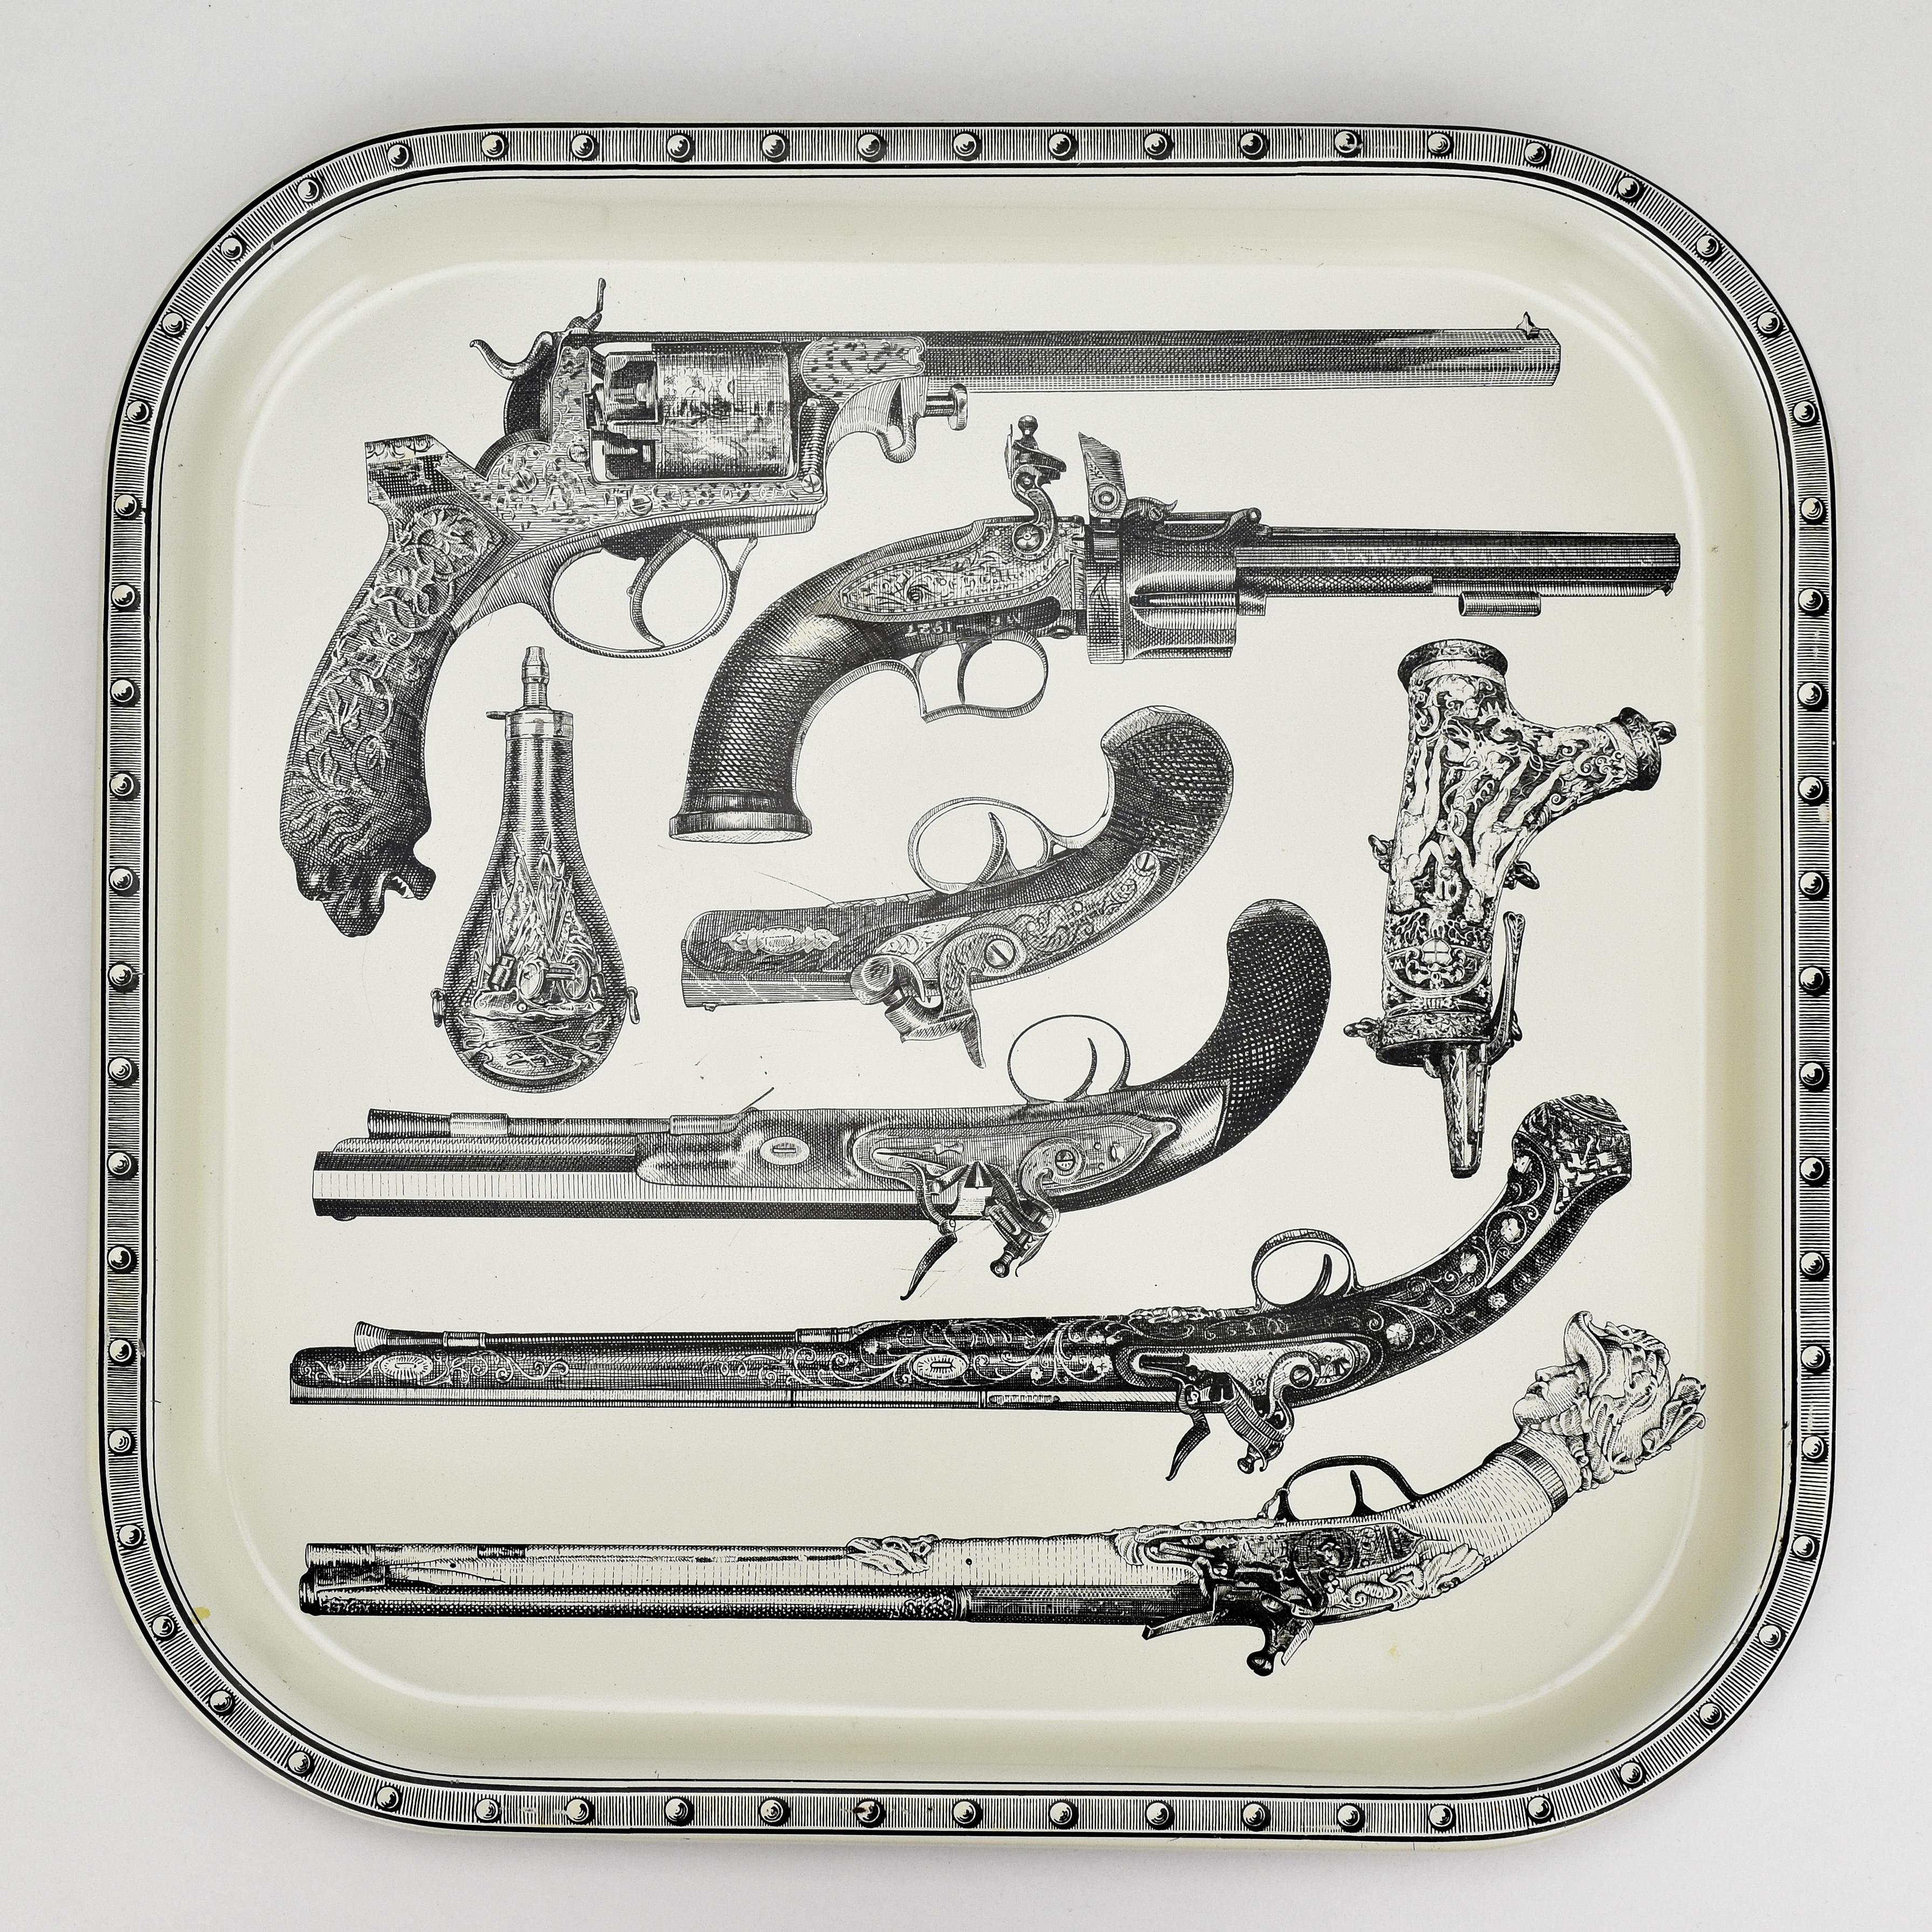 The vintage silkscreen printed metal tray designed by Piero Fornasetti in the 1960s features fine detailed depictions of guns spanning several centuries. The silkscreen printing technique imparts a classic touch, showcasing the detailed